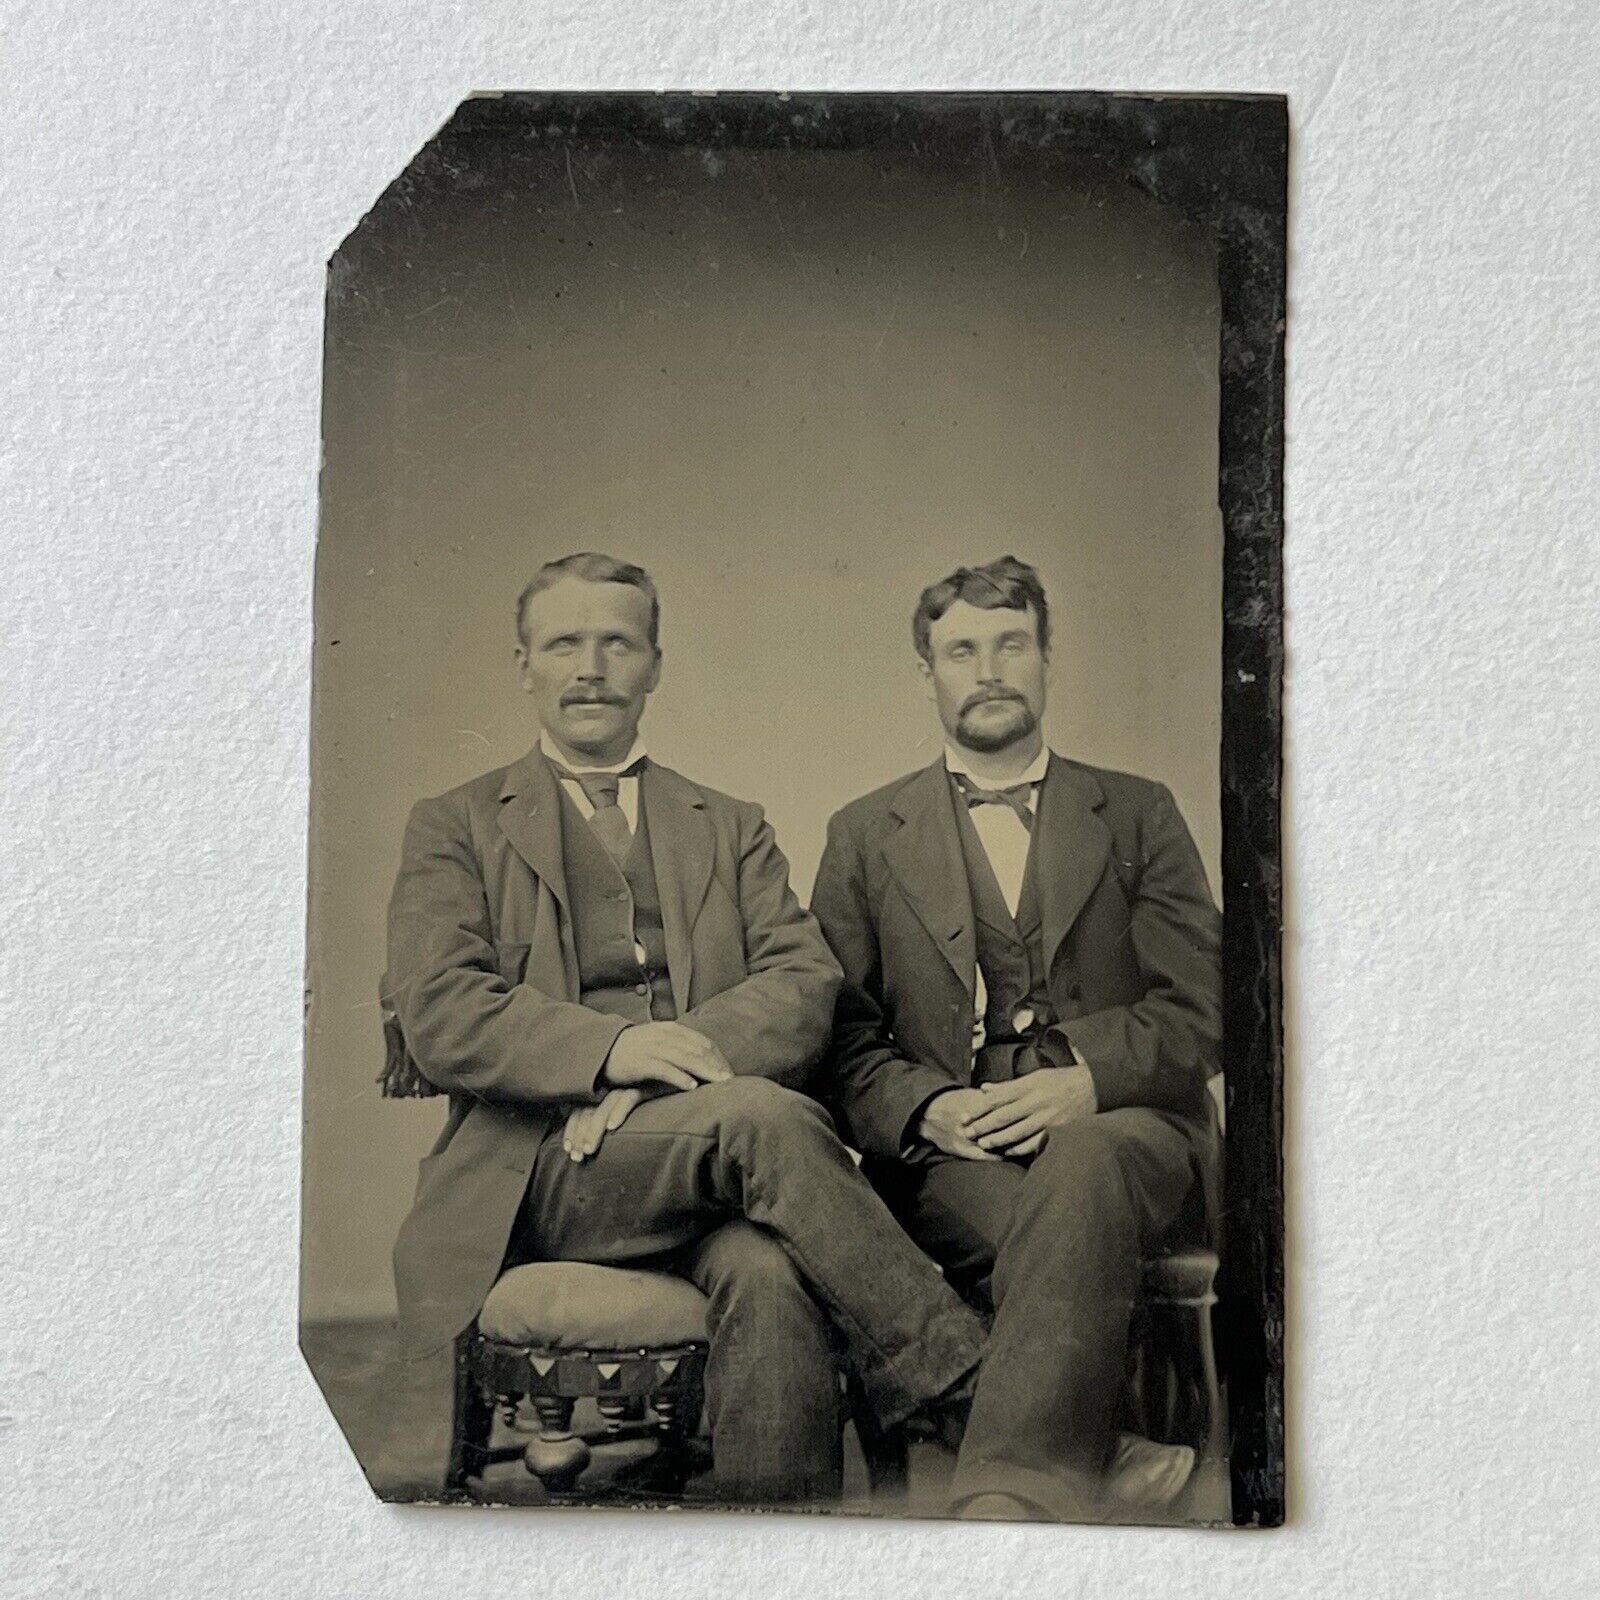 Antique Tintype Photograph Charming Handsome Men Working Class Suit & Boots